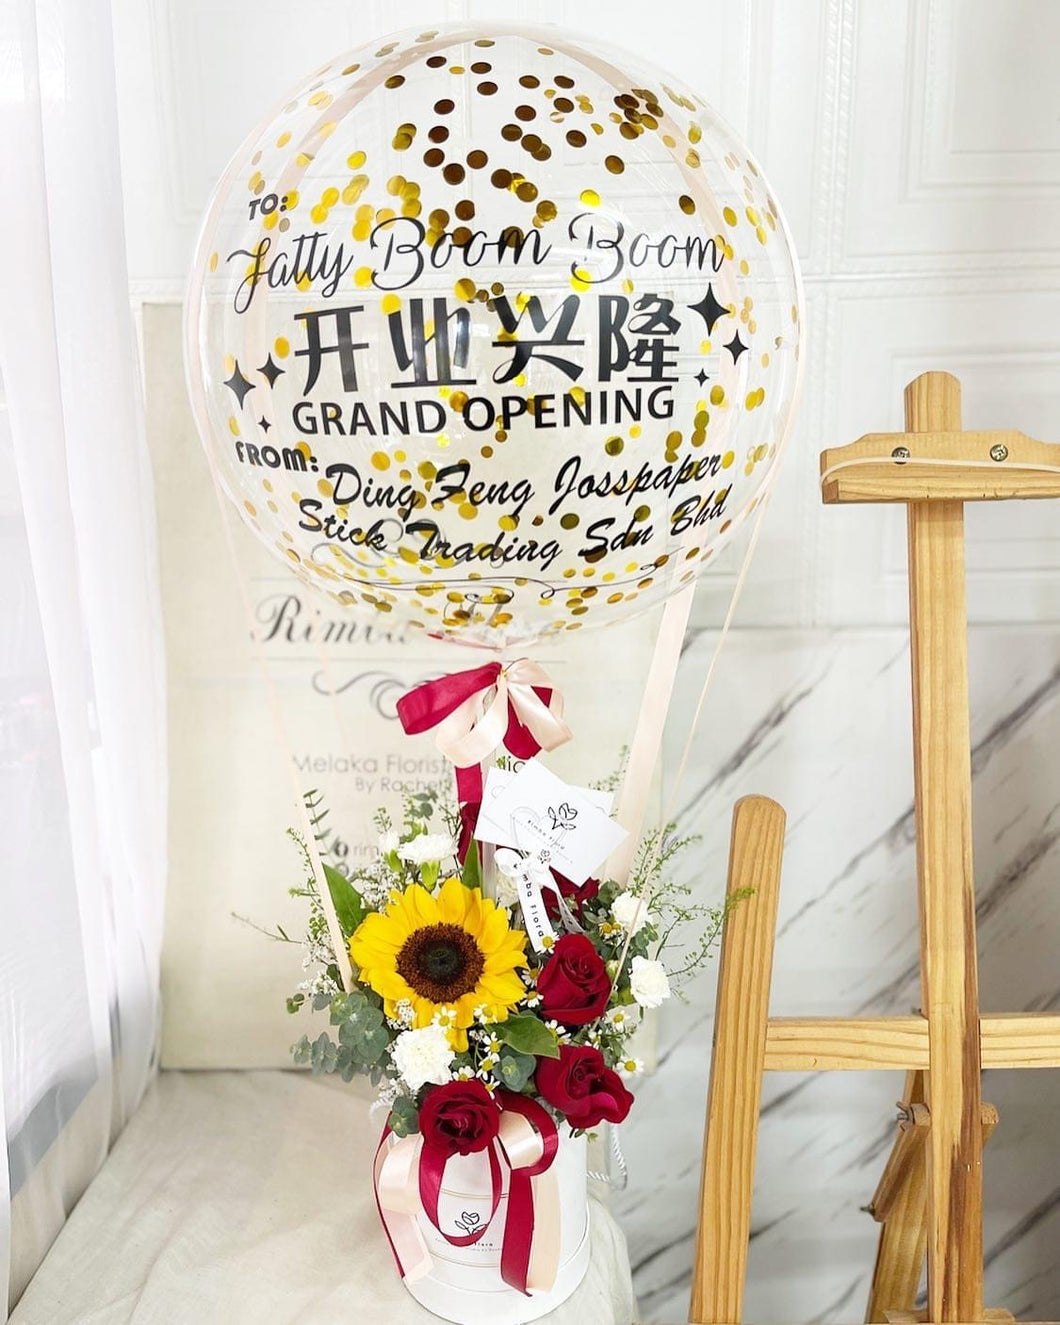 Hot Air Ballon To You (Sunflower Red Roses Design)